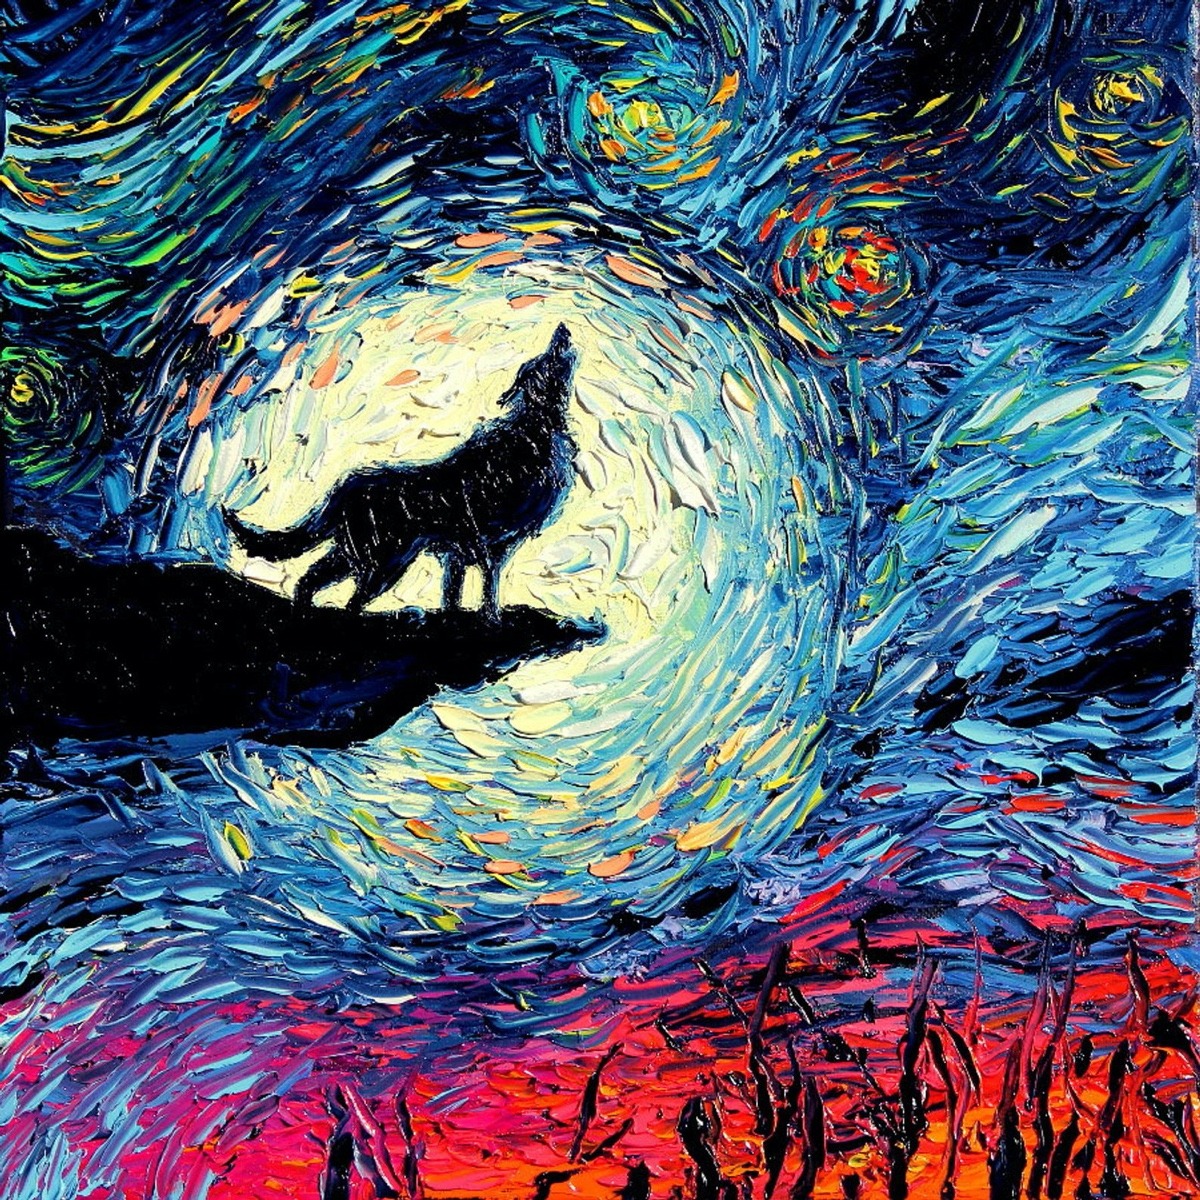 "Van Gogh Never Howled At The Moon," a painting by Aja. (check out more of Aja's work at www.sagittariusgallery.com)